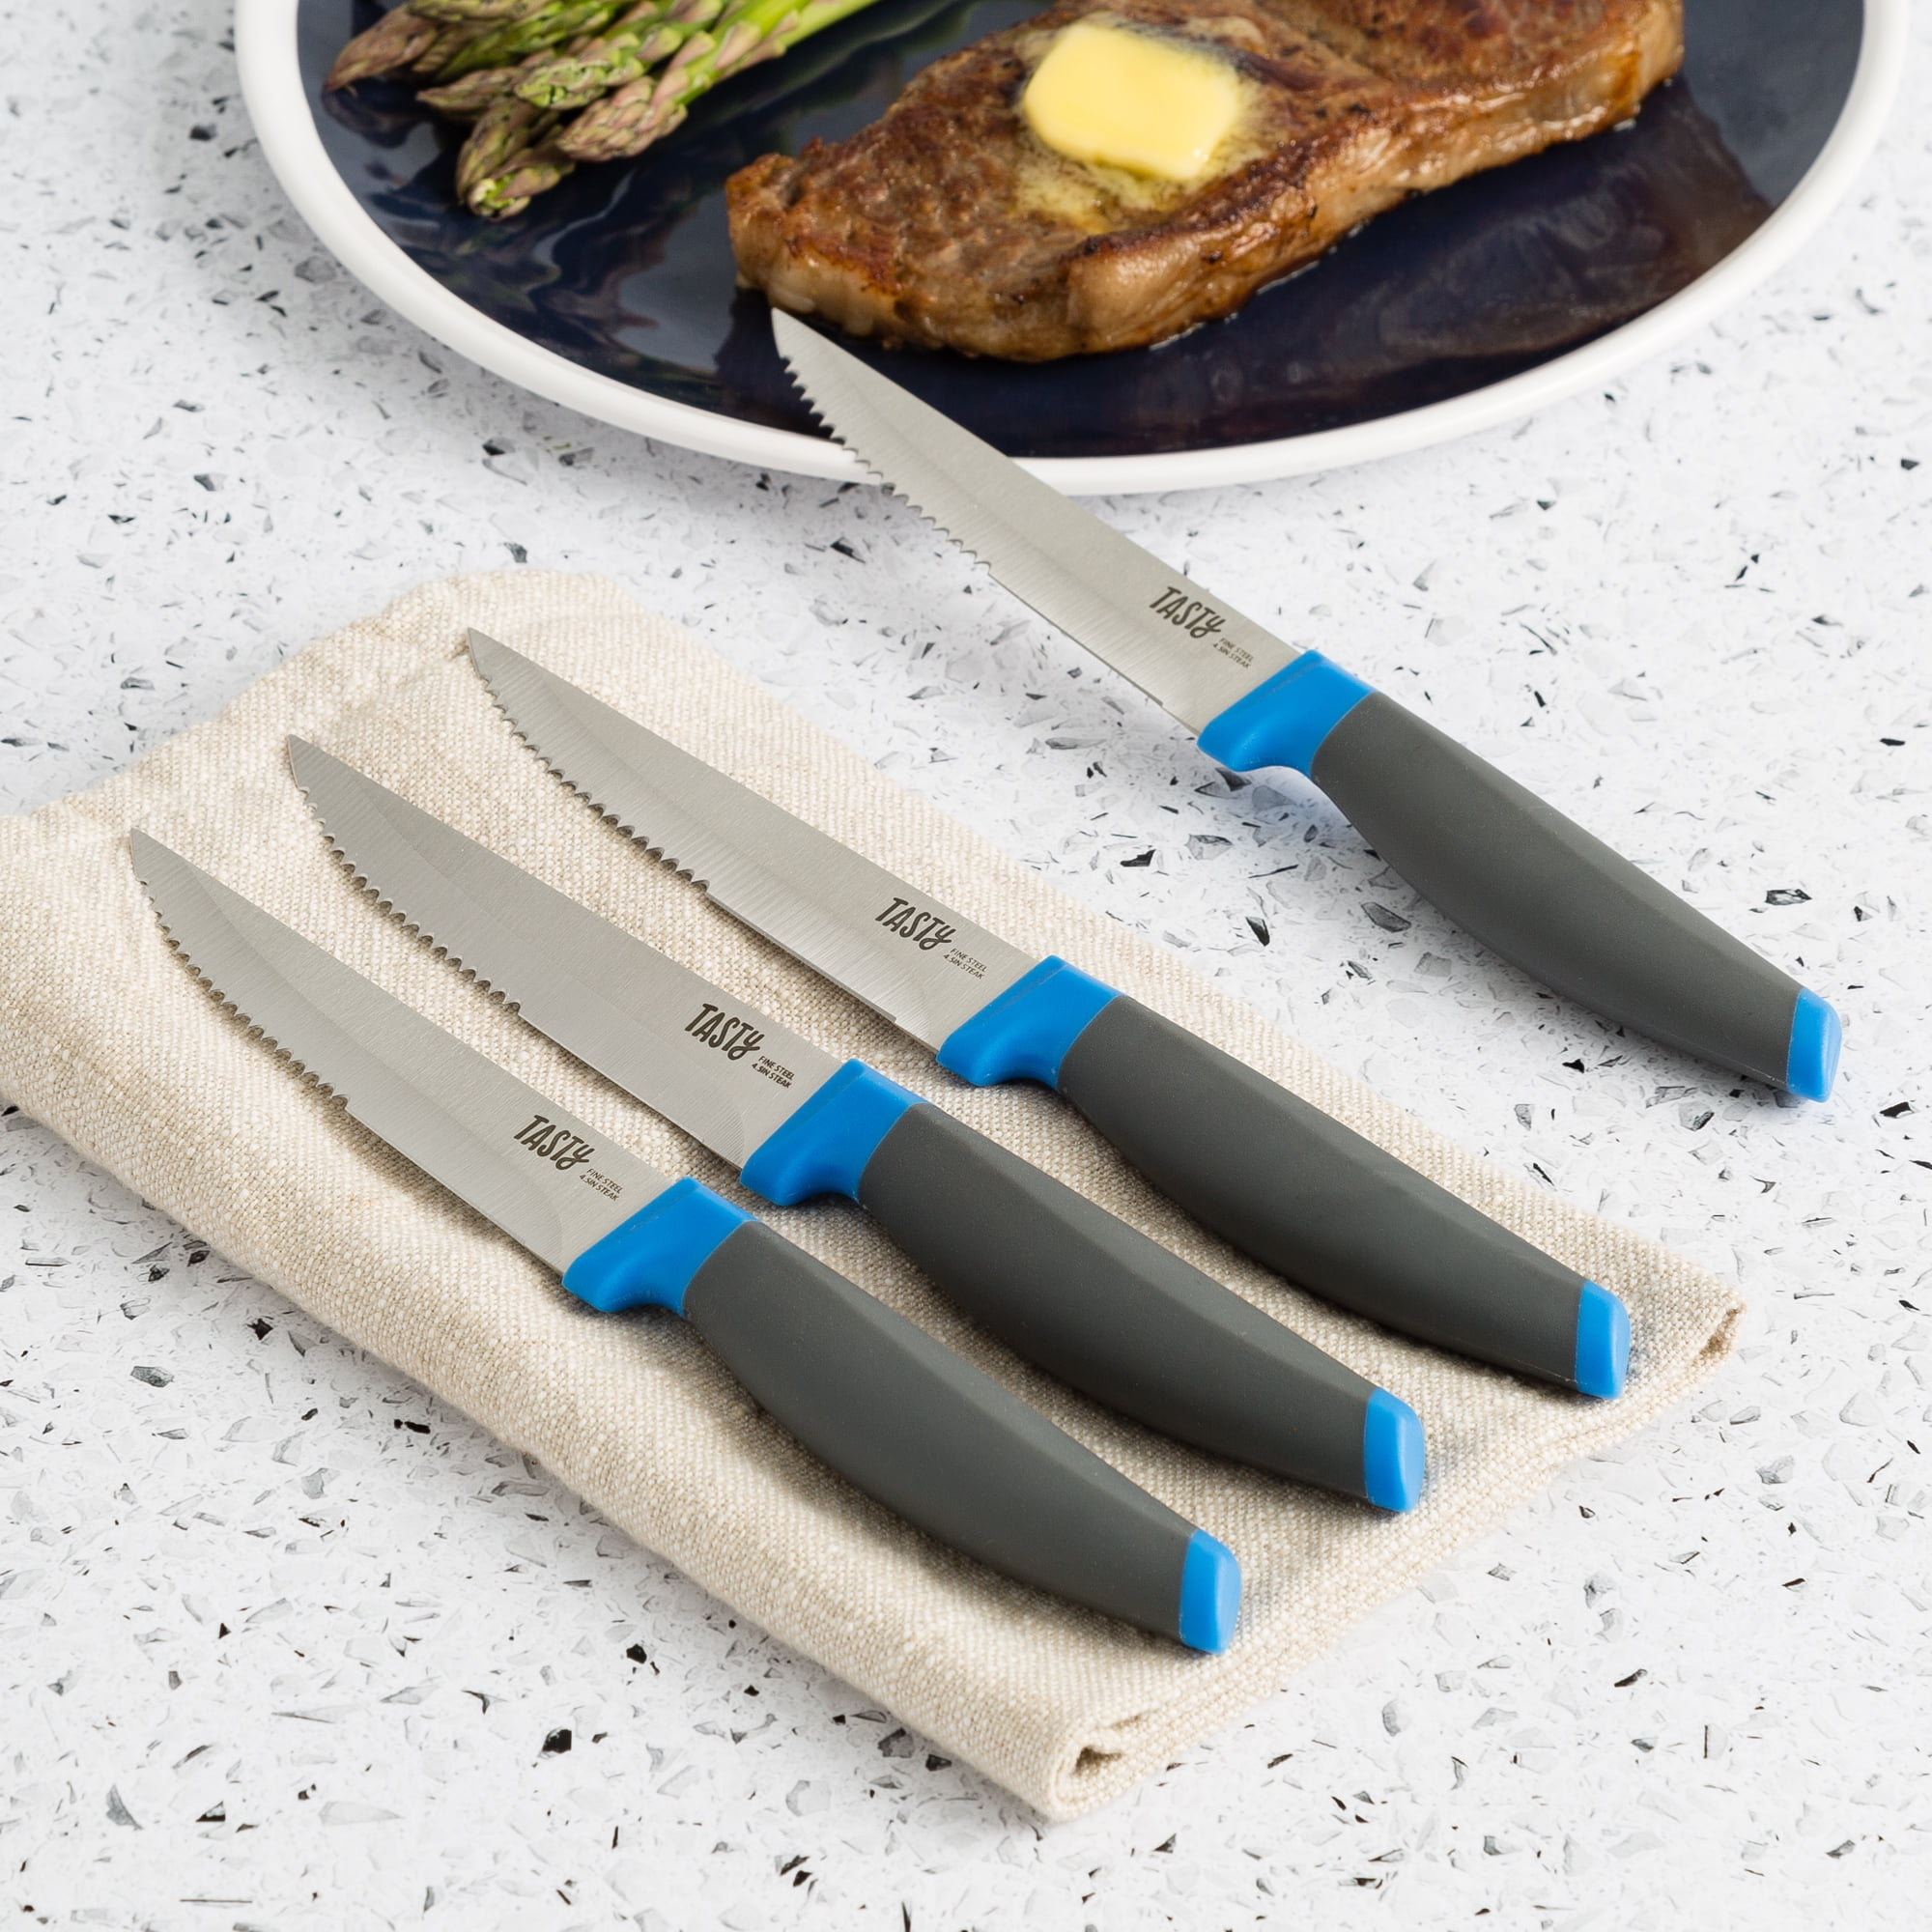 Tasty 5 Piece Stainless Steel Cutlery Knife Set, Royal Blue 